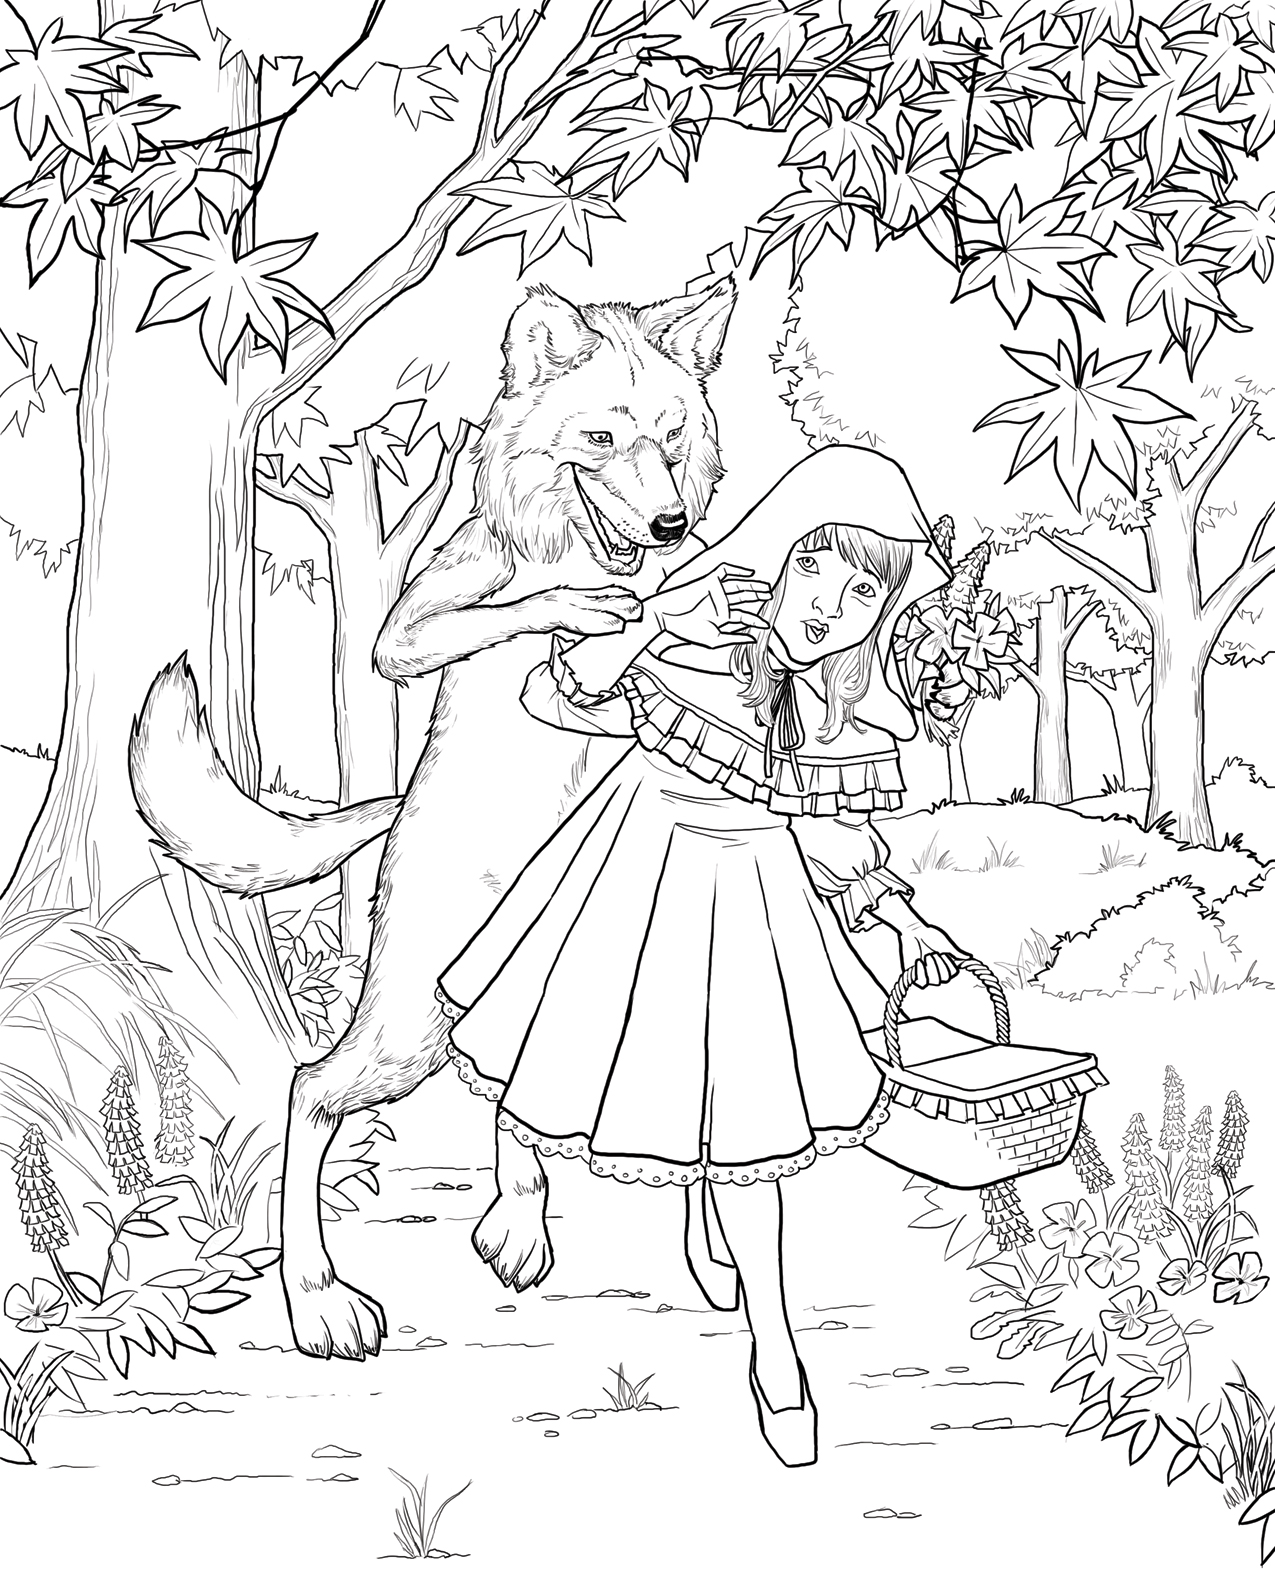 Little red riding hood coloring pages to download and